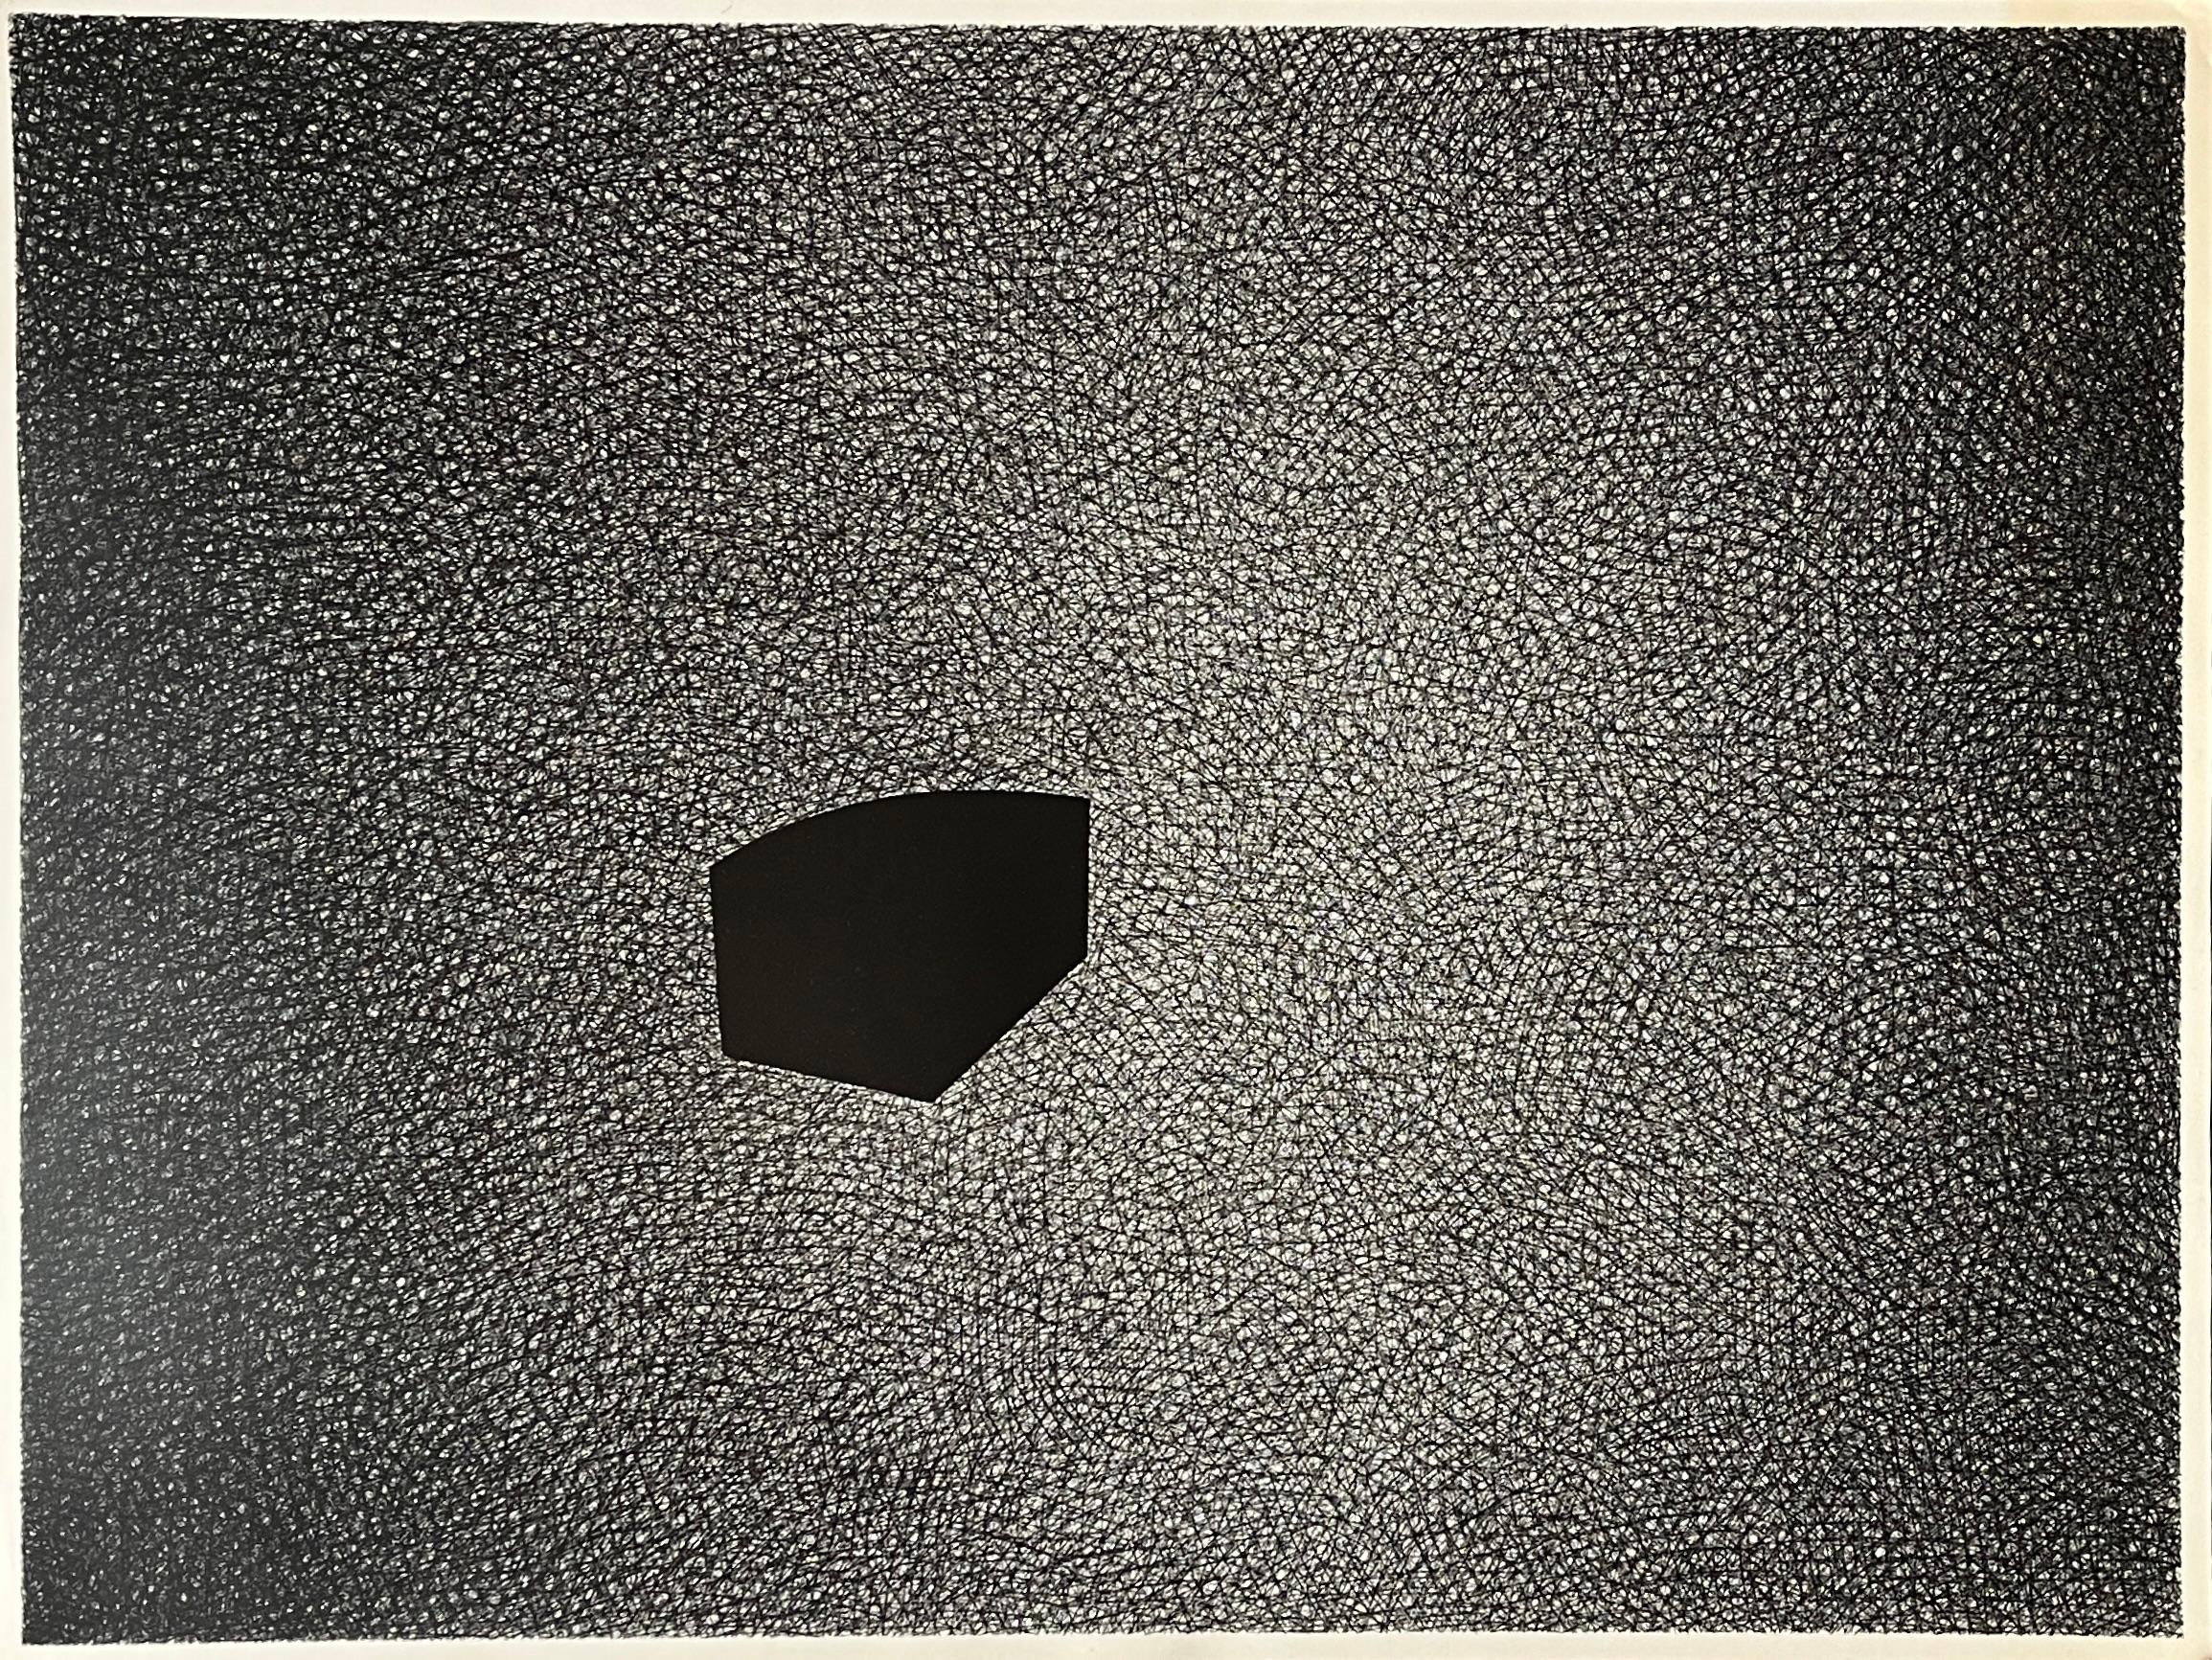 Jack Scott Abstract Drawing - 1980s "#15" Cross Hatch Abstract Charcoal Drawing Minimalist Modern Art